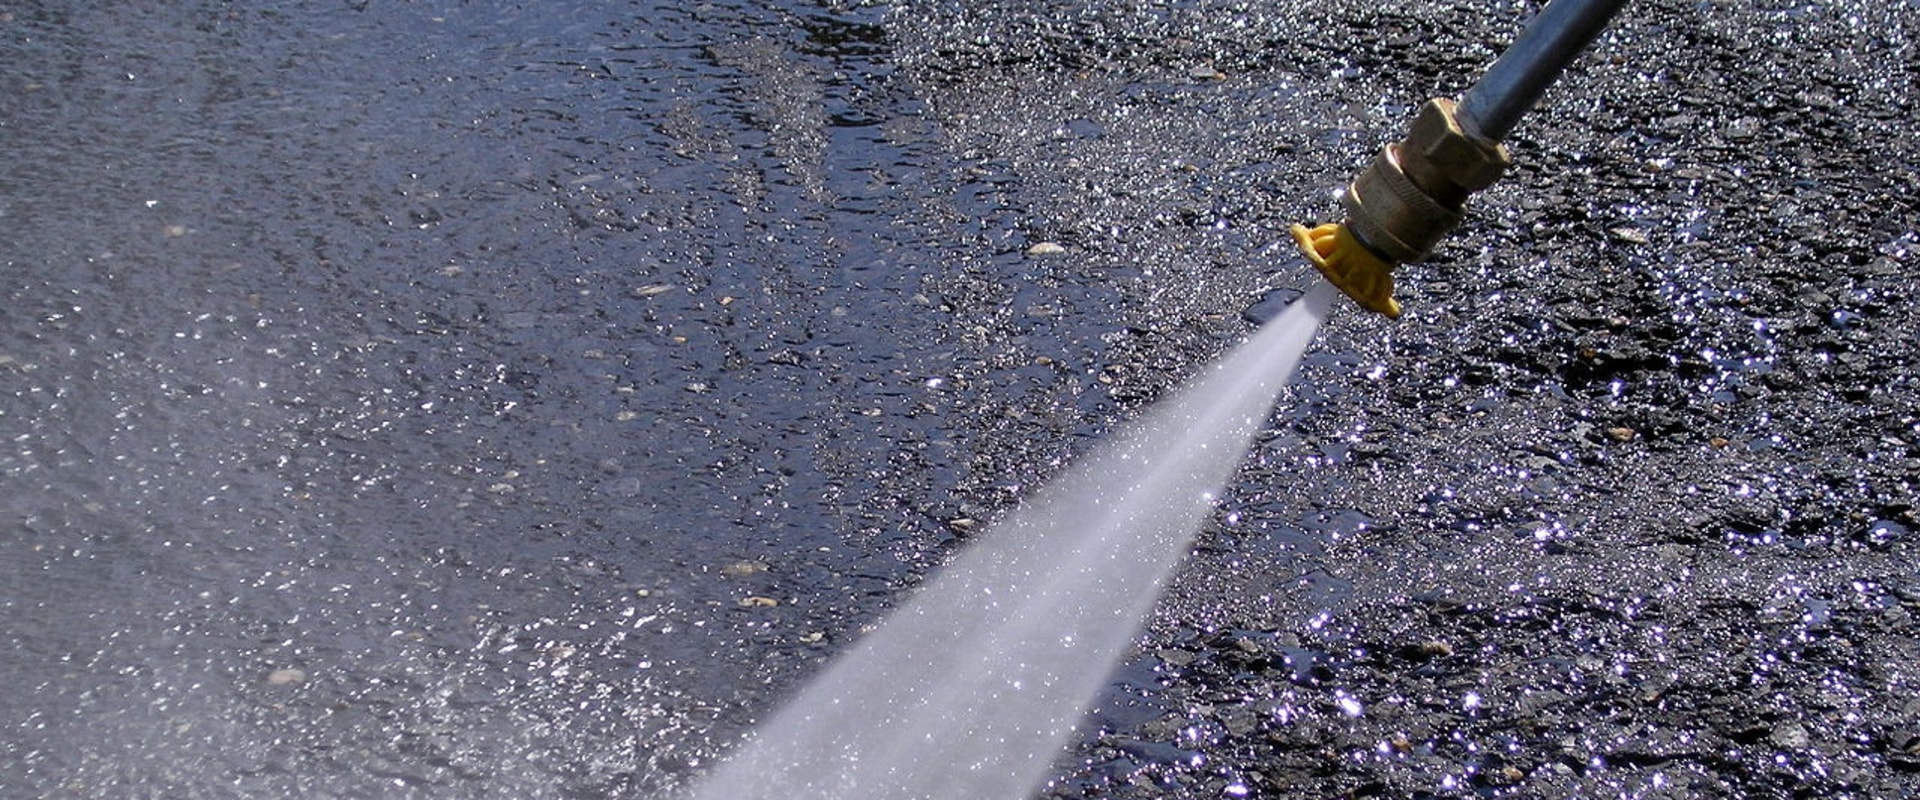 What are the essential safety precautions to follow when pressure washing?